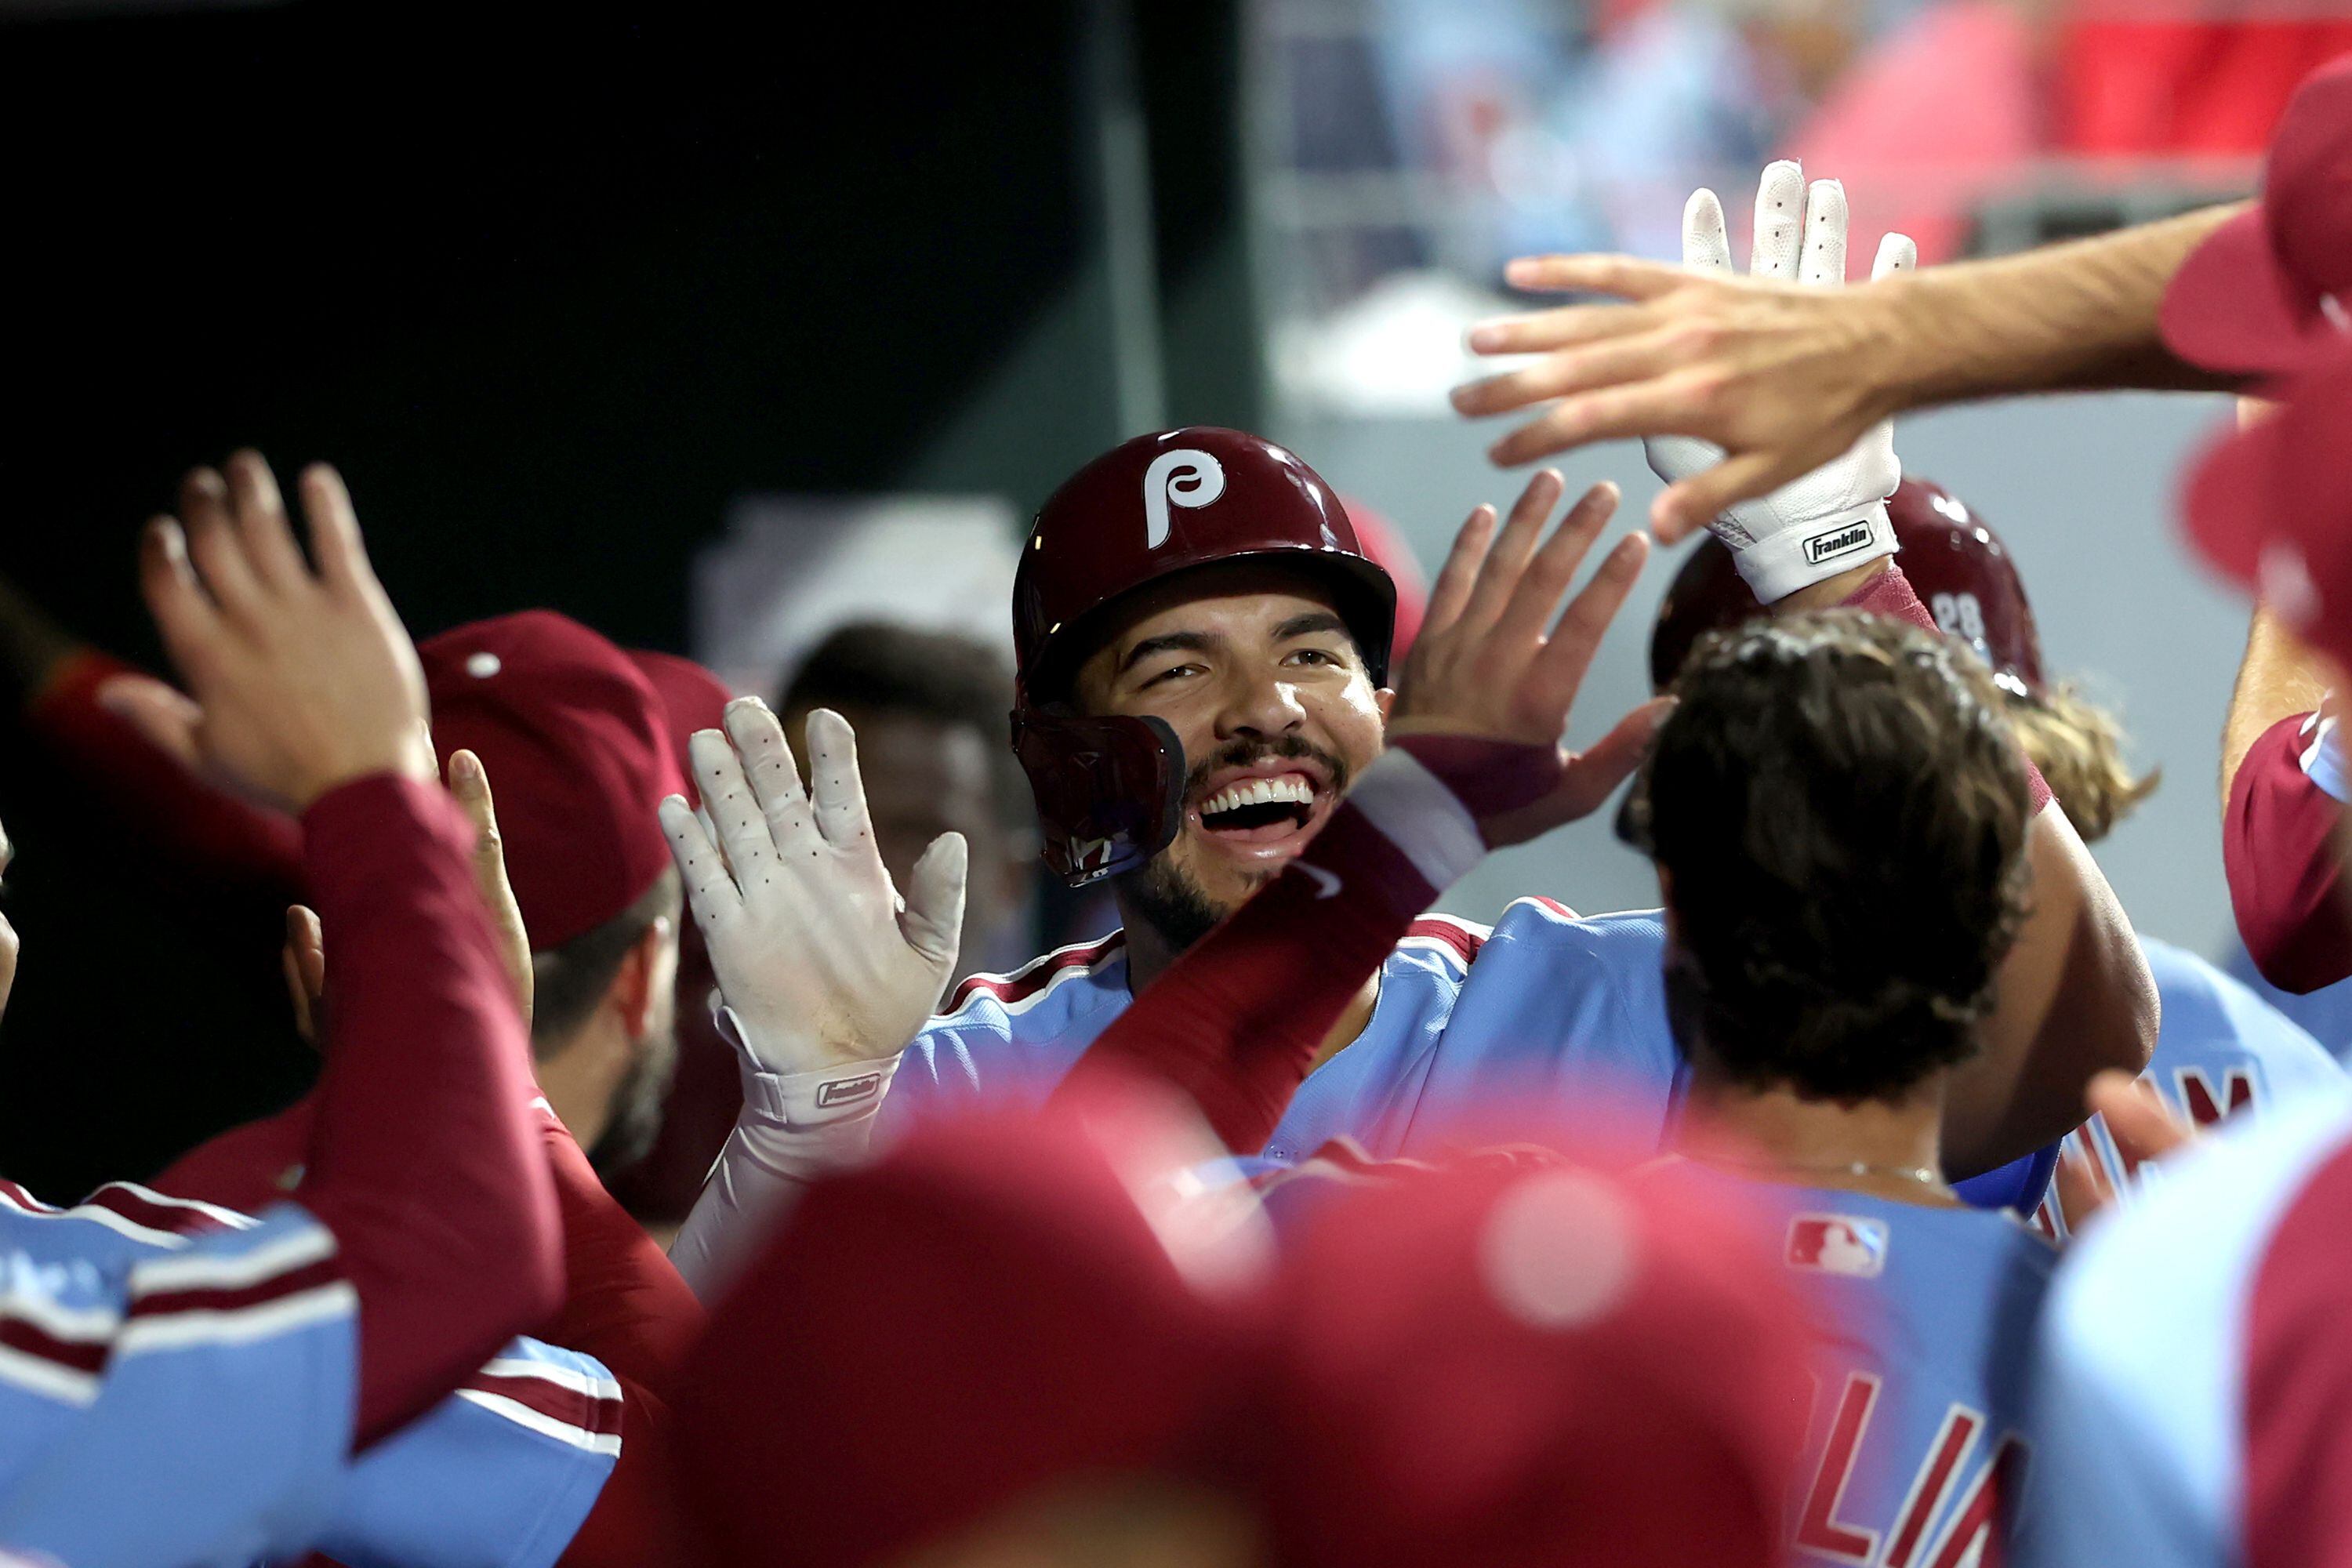 Rookie Darick Hall enjoying 'overwhelming' support as new Phils slugger   Phillies Nation - Your source for Philadelphia Phillies news, opinion,  history, rumors, events, and other fun stuff.